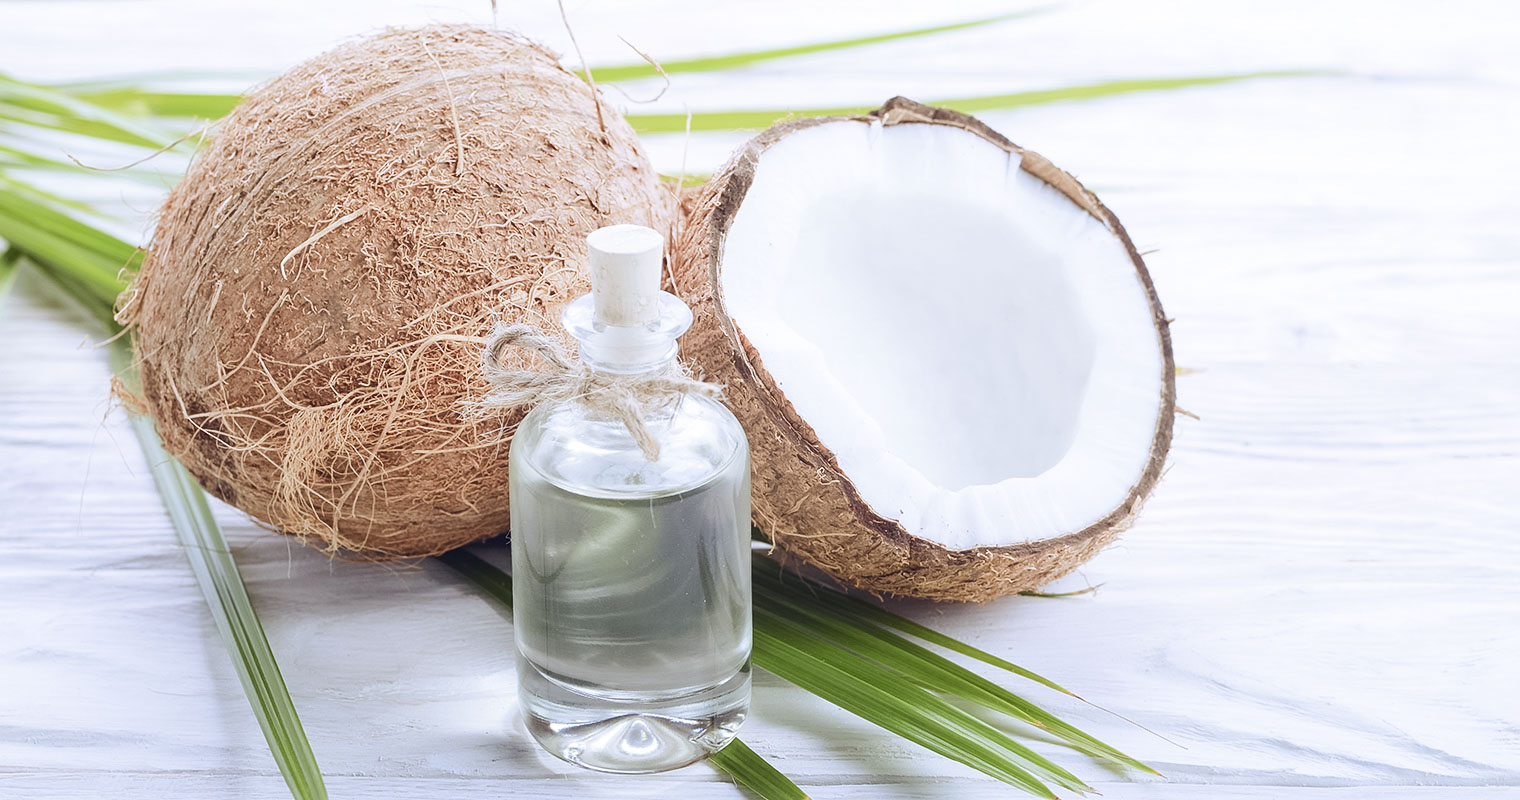 Opened coconut and a bottle of coconut oil